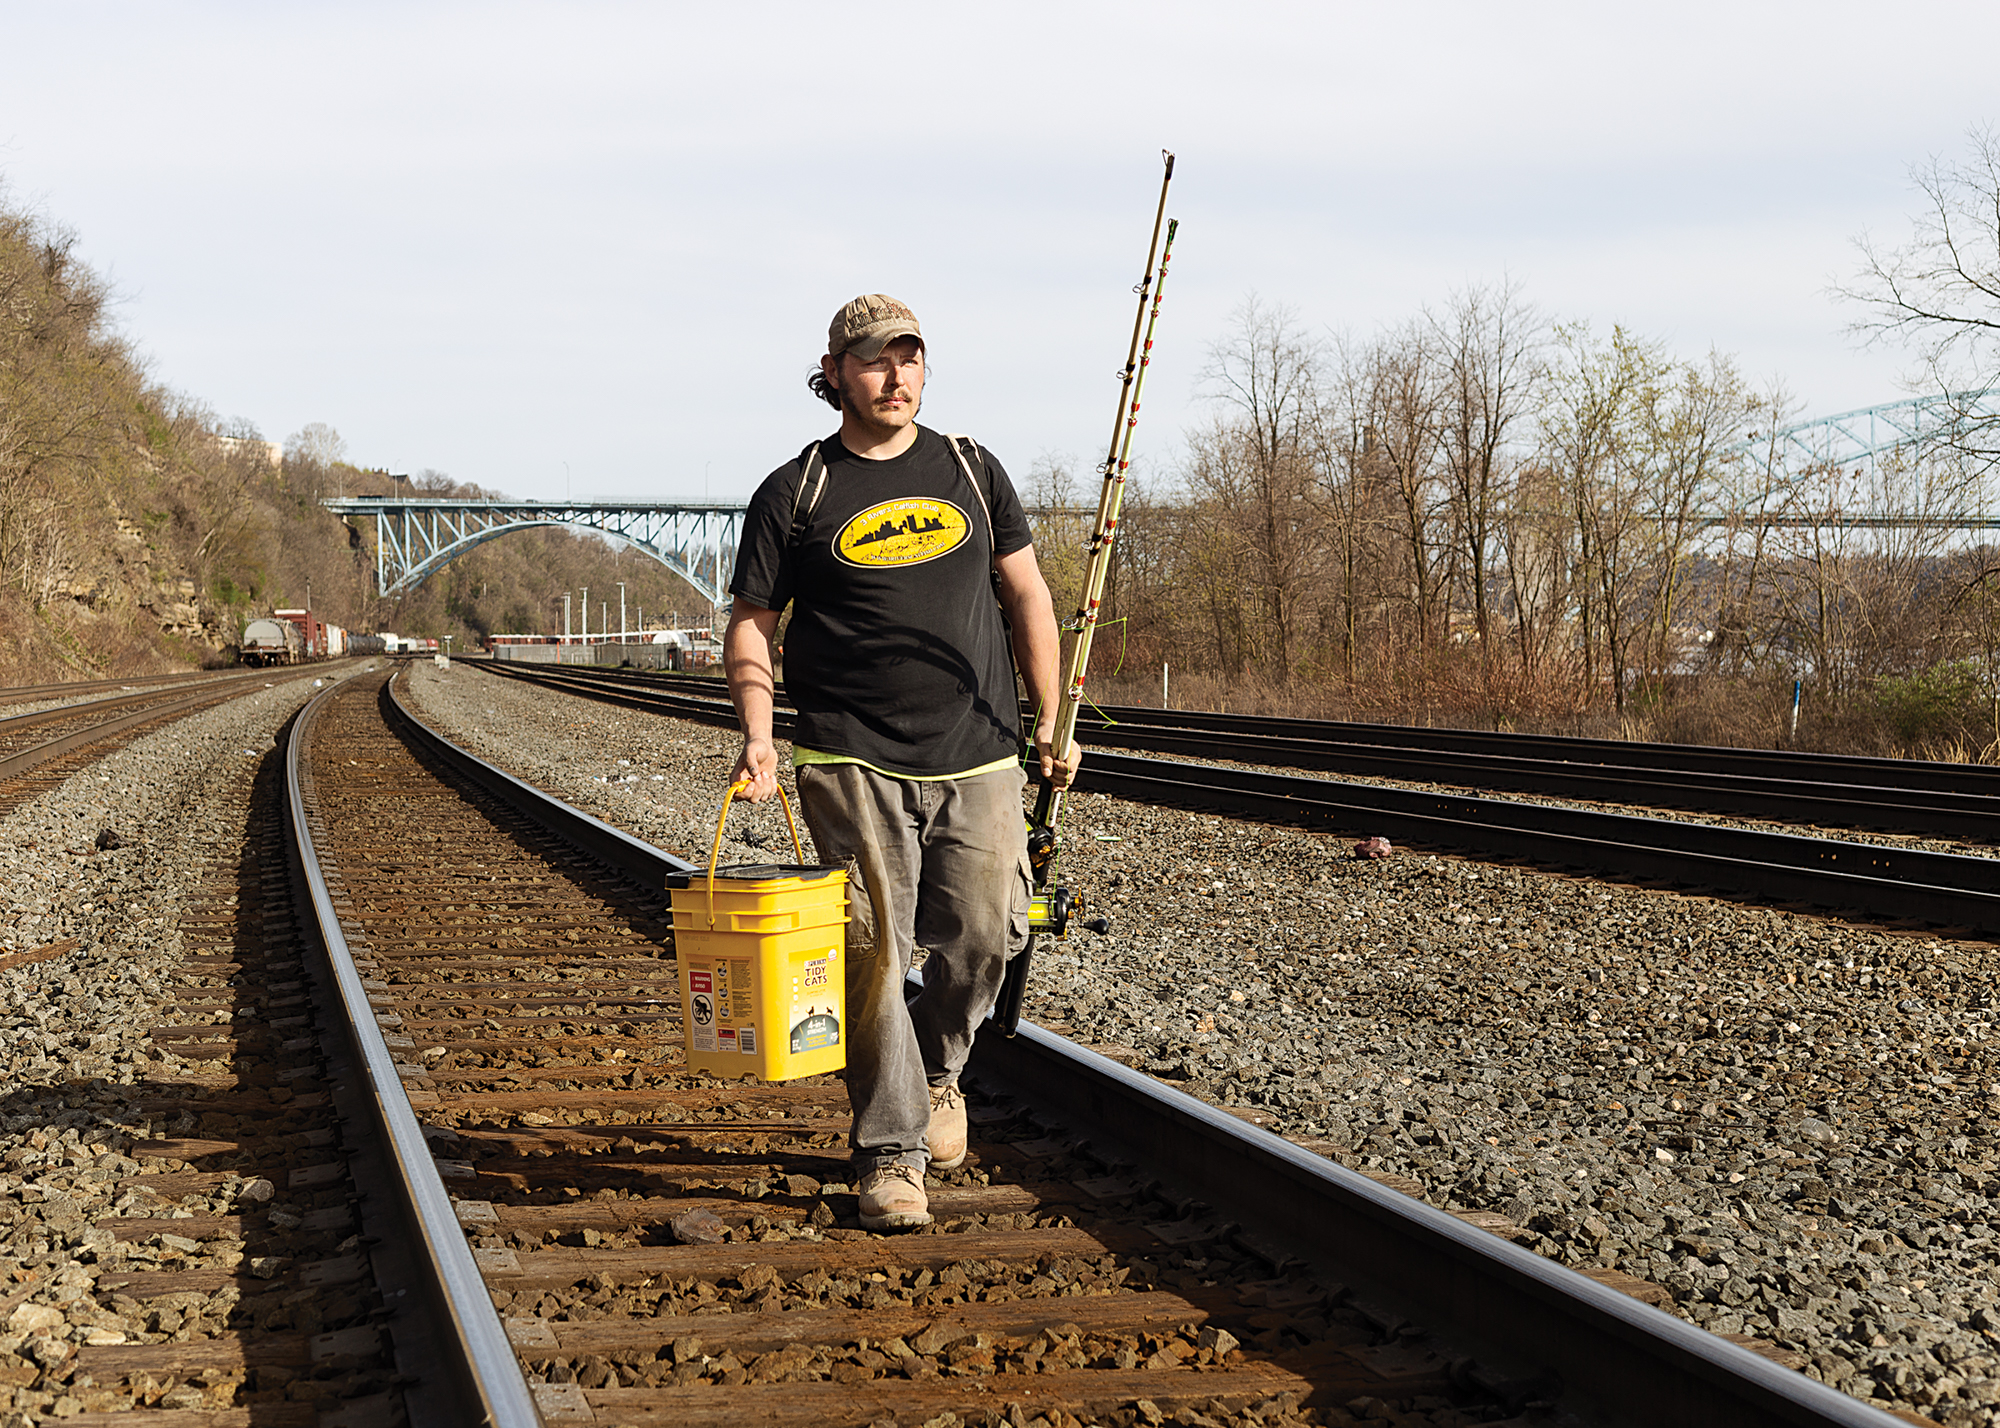 A man with a bucket and fishing rods walks on railroad tracks.